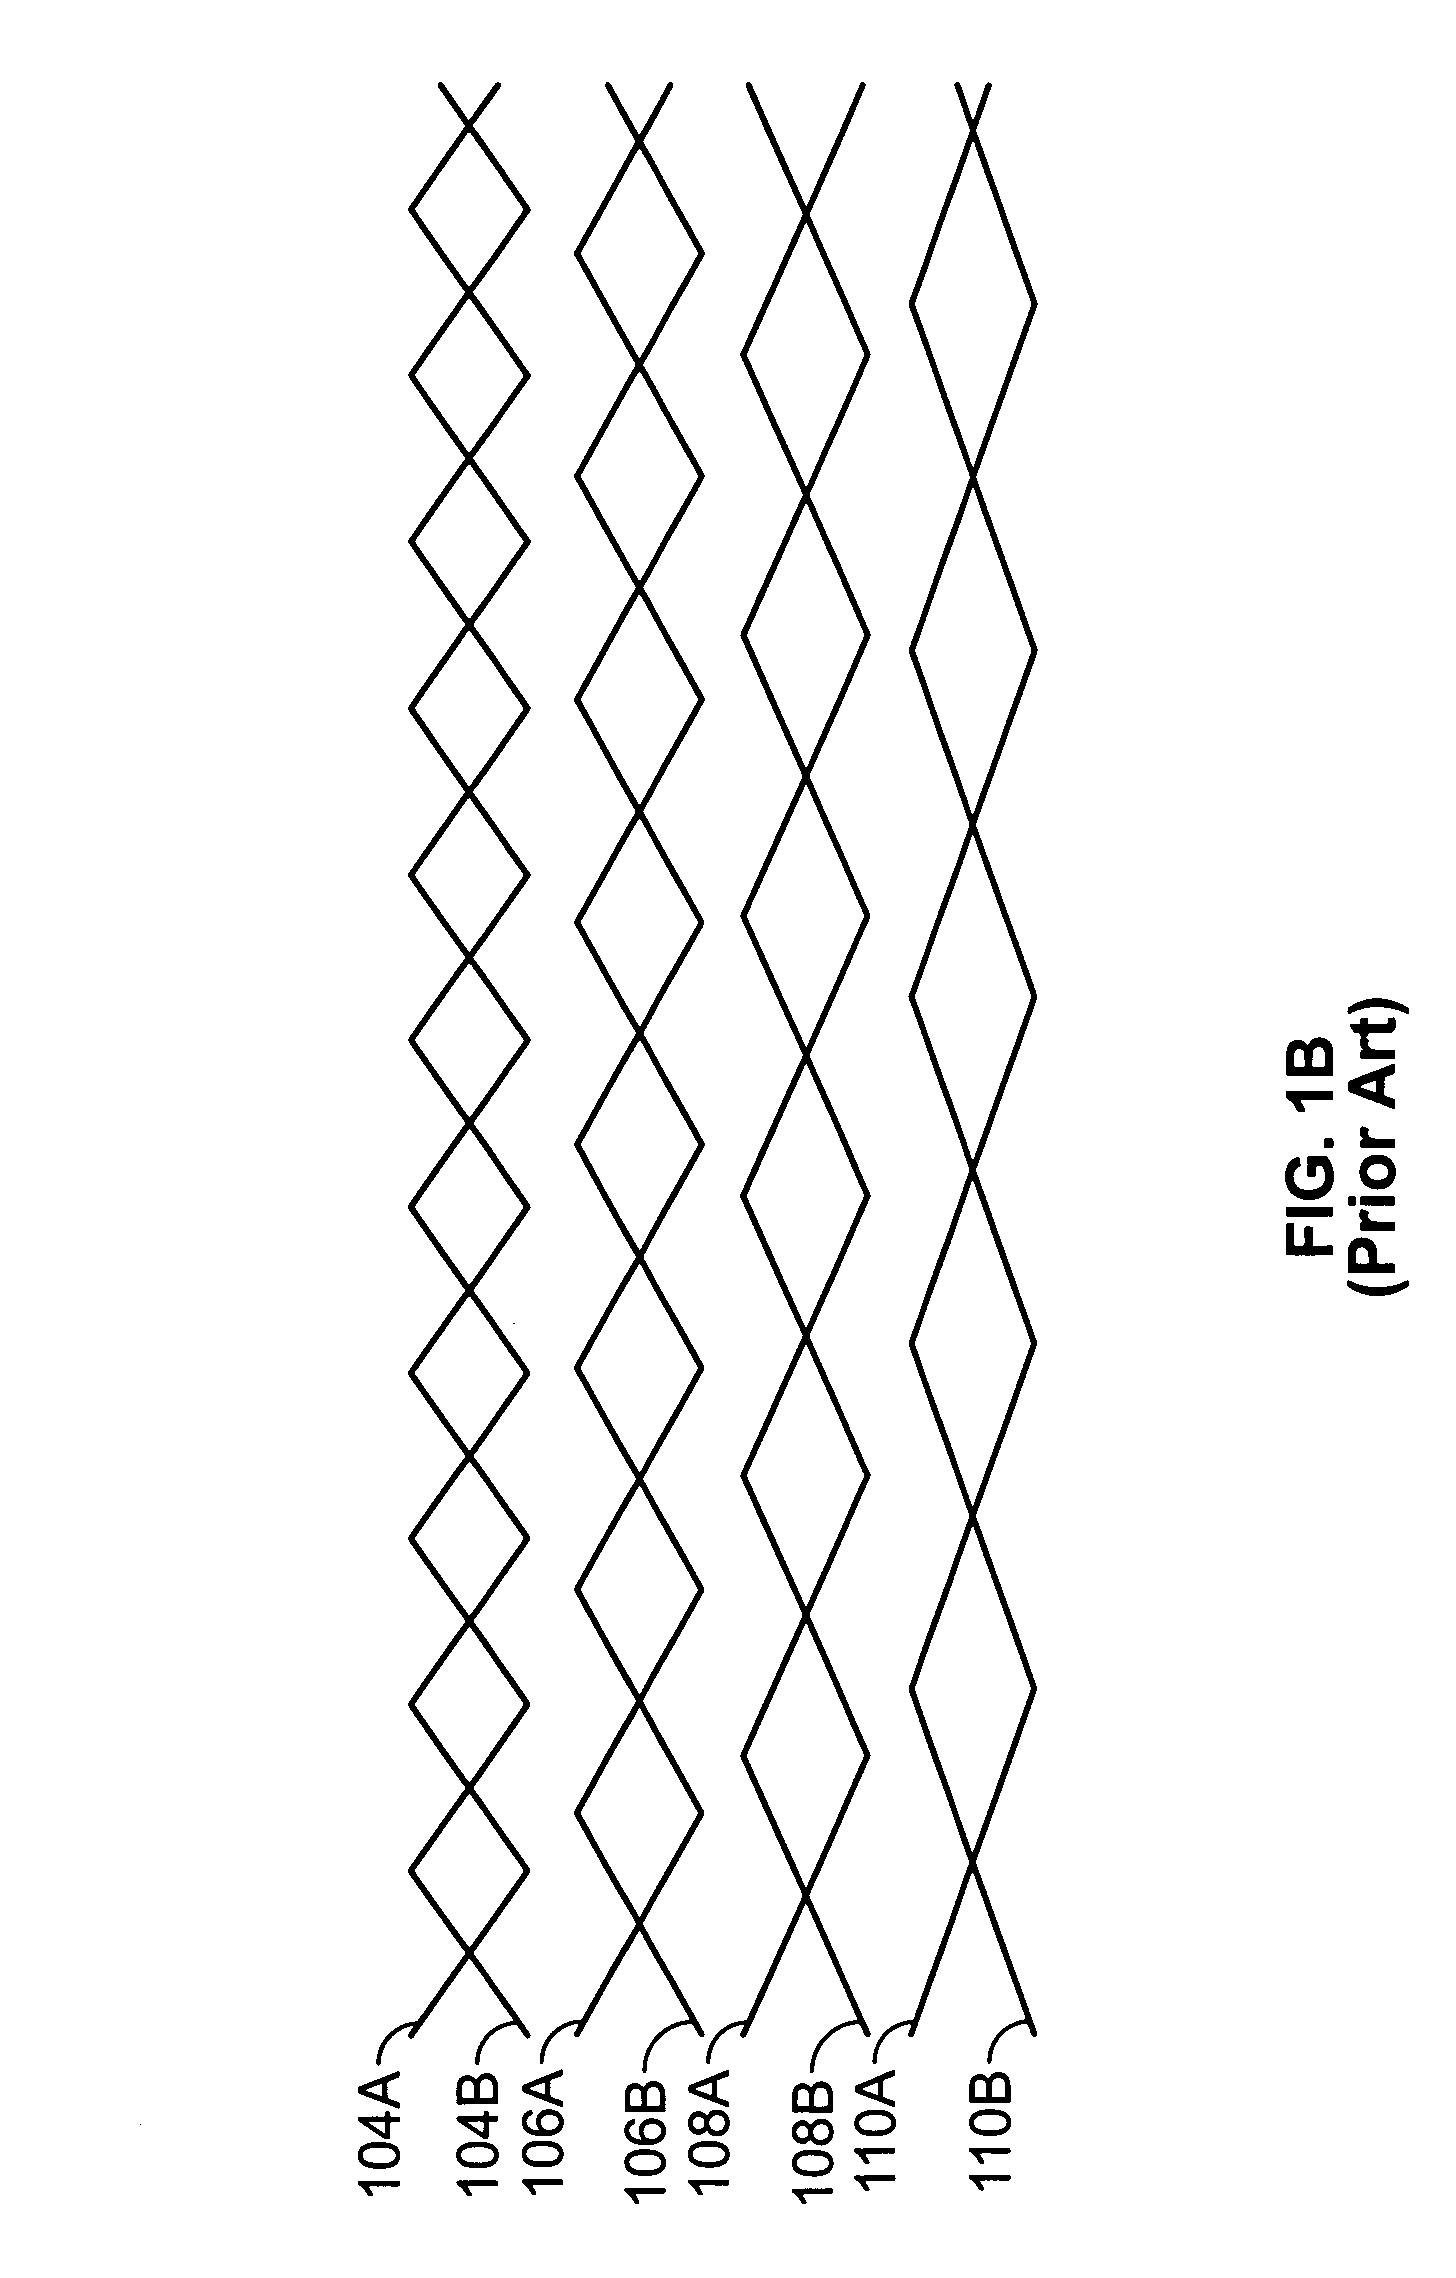 Cable apparatus for minimizing skew delay of analog signals and cross-talk from digital signals and method of making same